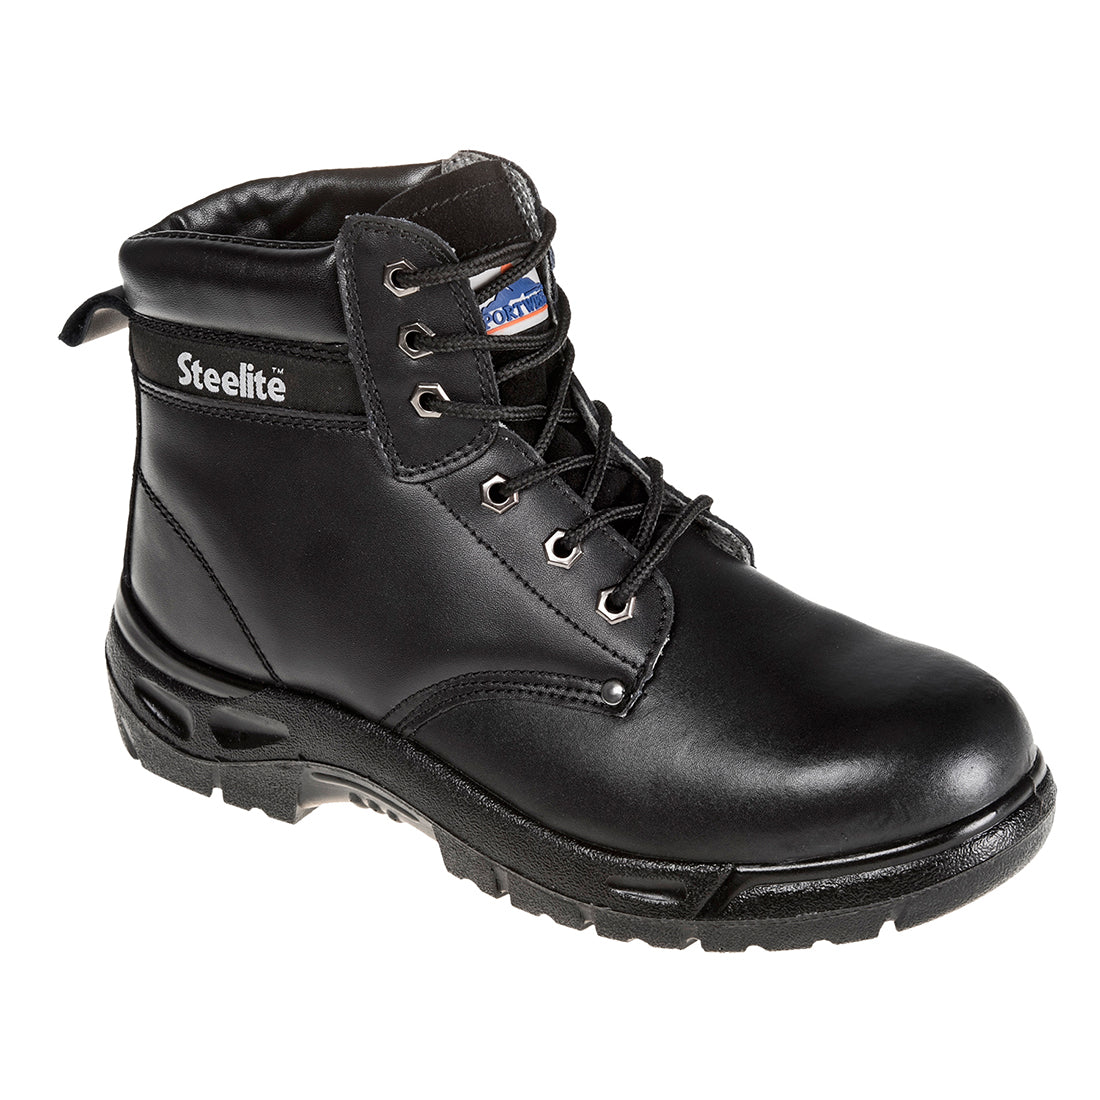 PORTWEST SIZE 13 / 48 FW03 Black Steelite Boot S3 Steel toe safety boot rigger